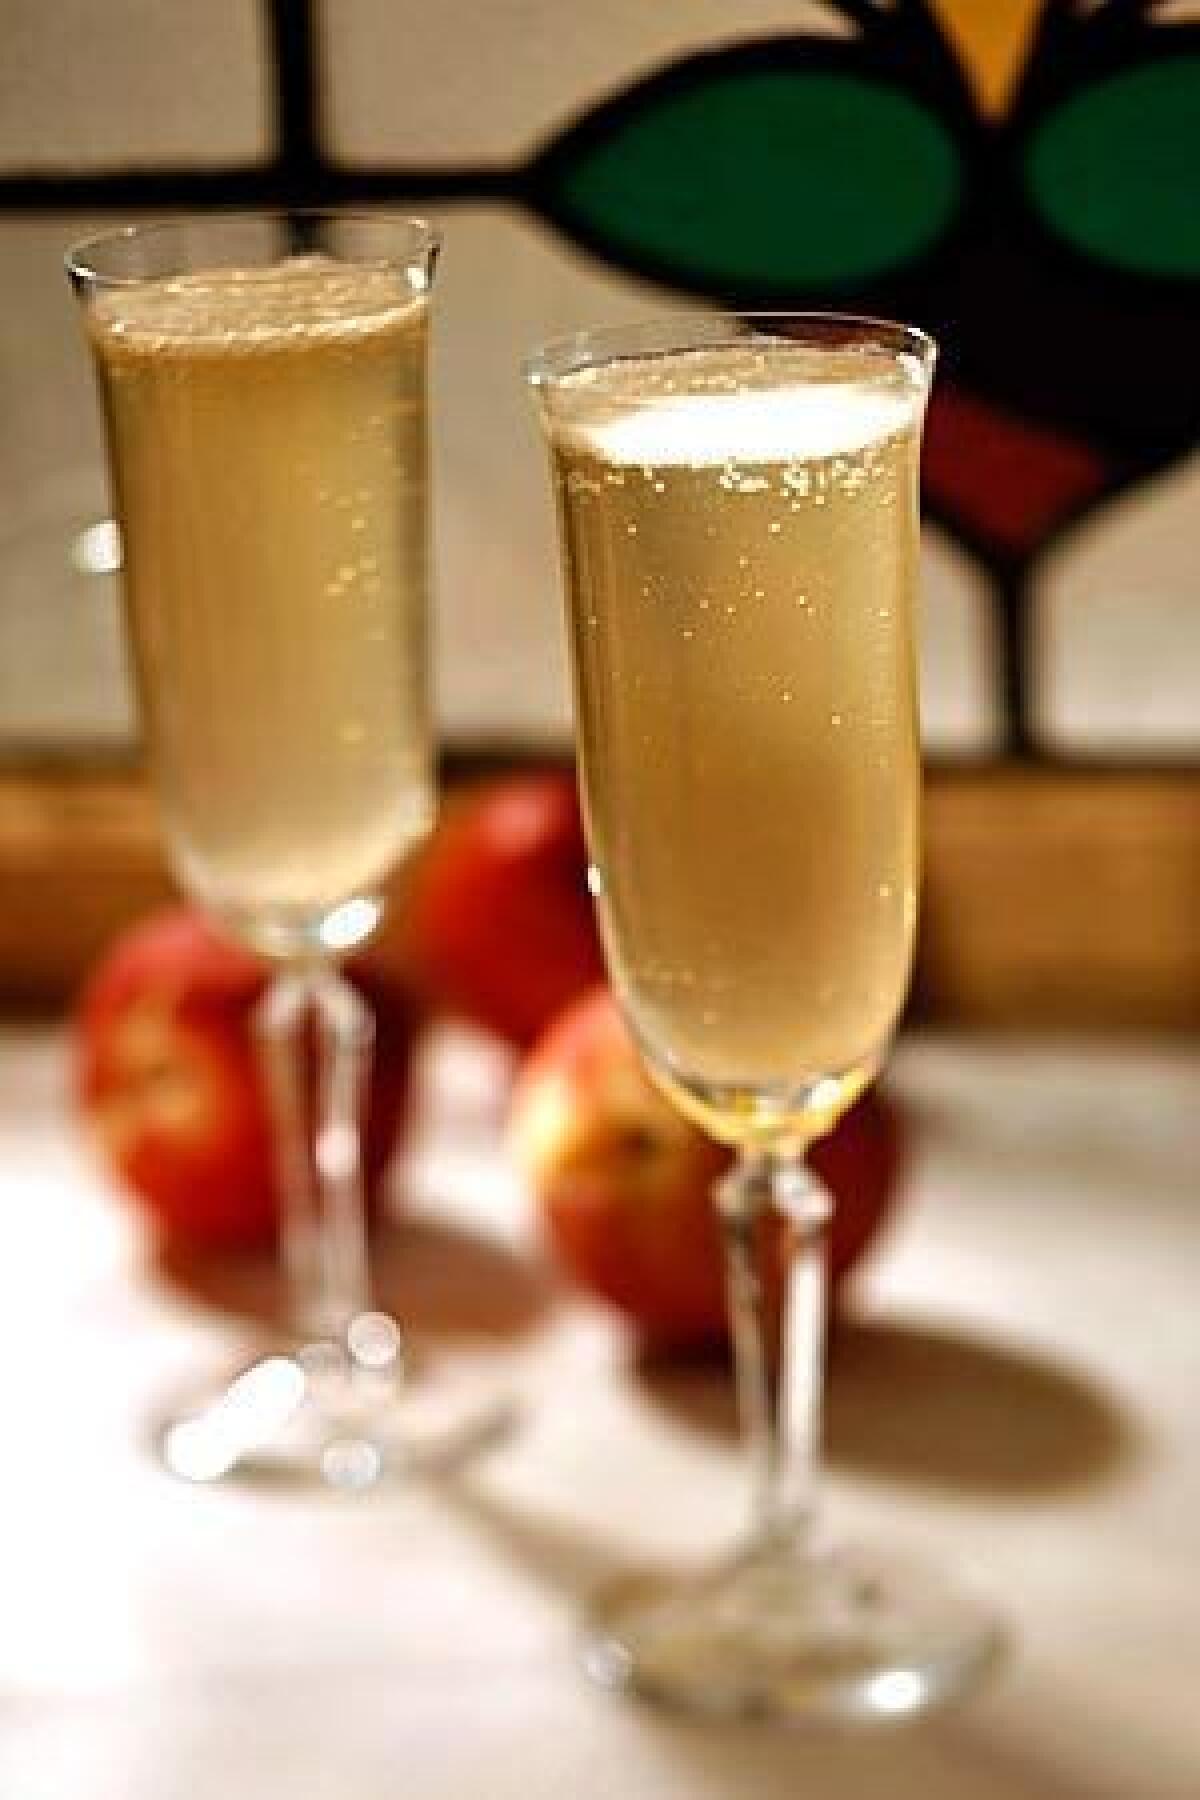 The Bellini, the Venetian aperitivo of white peach juice and Prosecco, the sparkling wine from the Veneto. The original was invented by Giuseppe Cipriani at Harry's Bar in Venice, Italy.